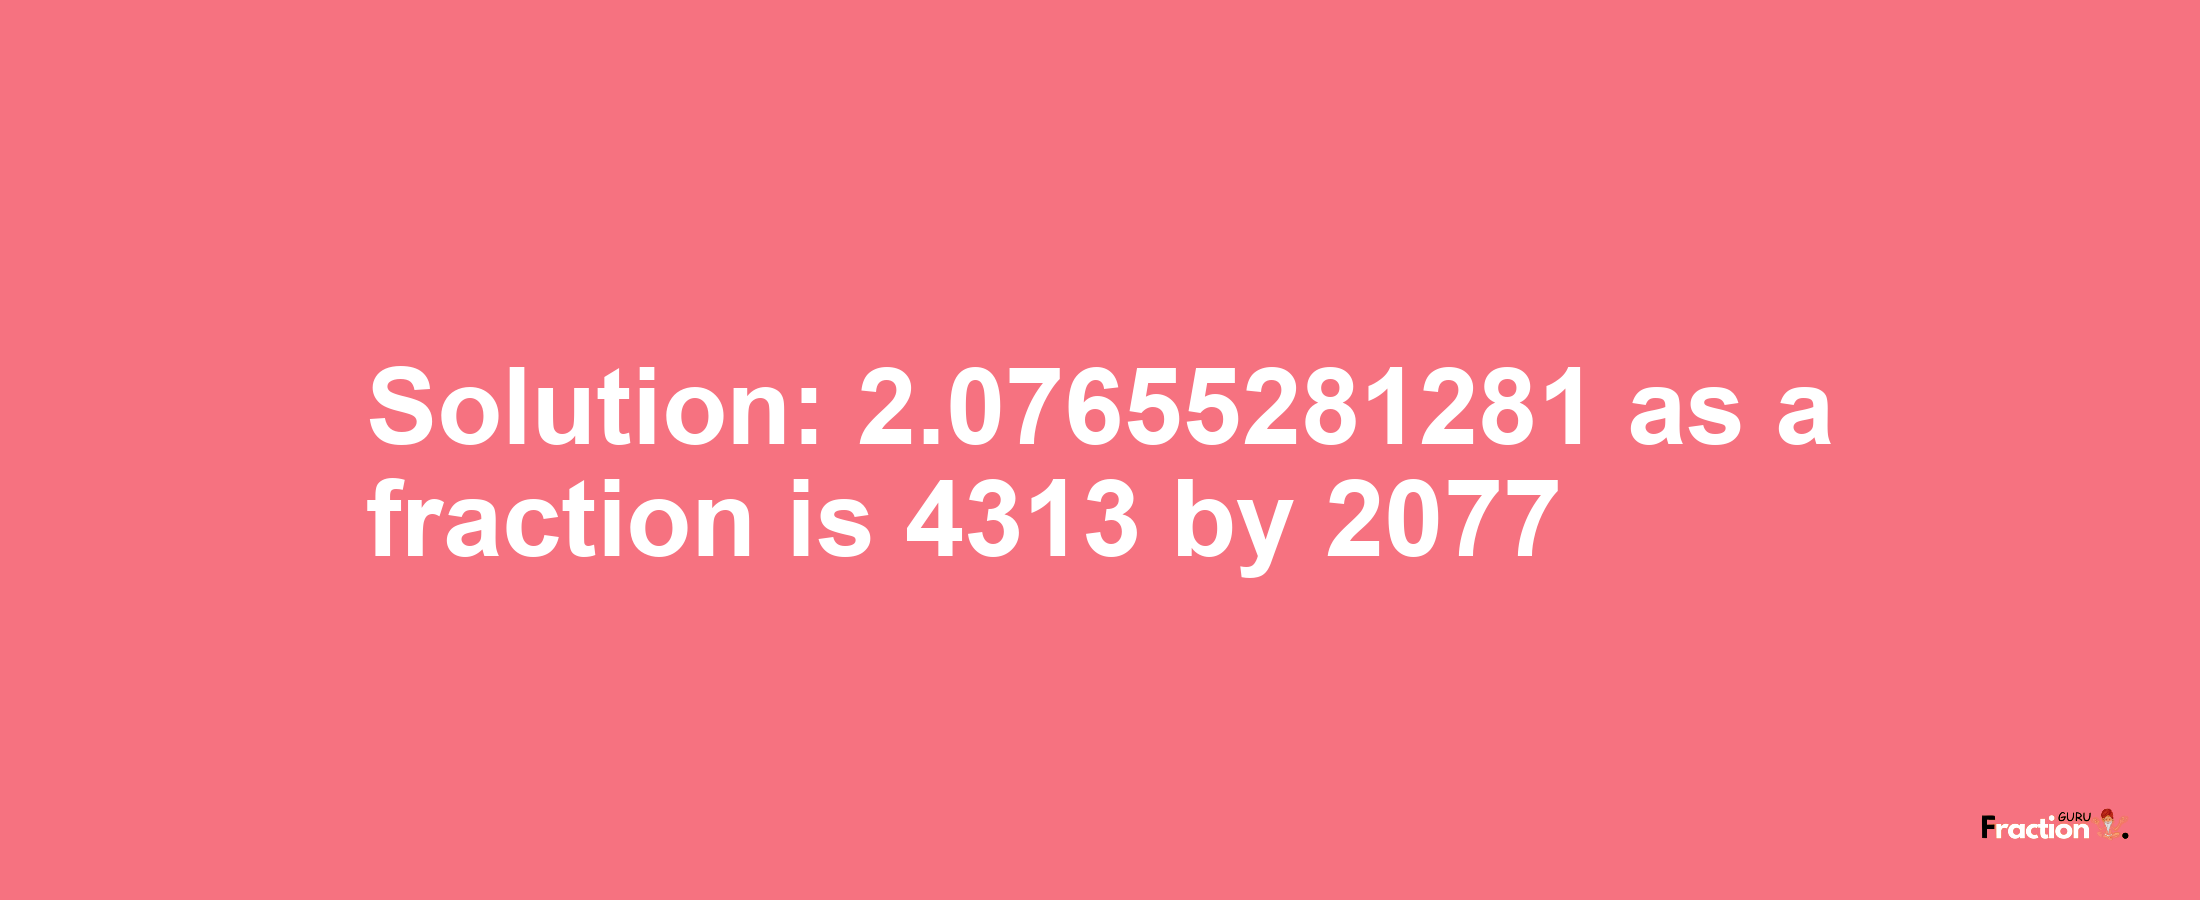 Solution:2.07655281281 as a fraction is 4313/2077